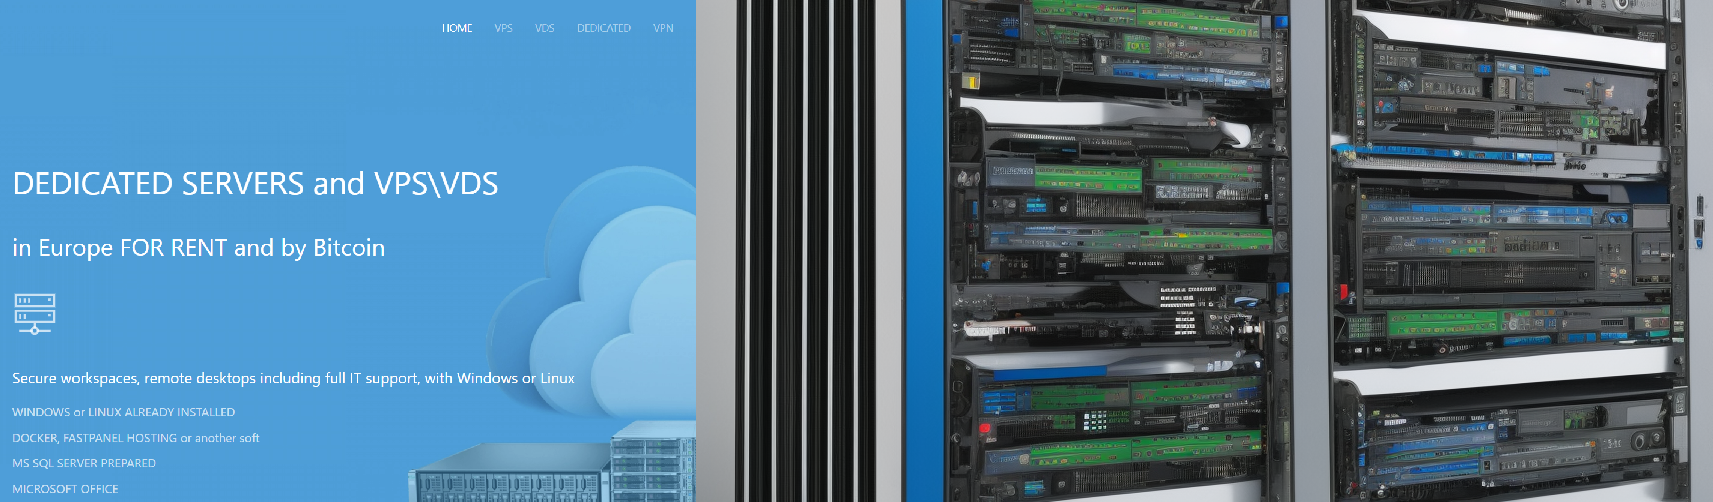 winservers.net is the best and cheapest dedicated servers